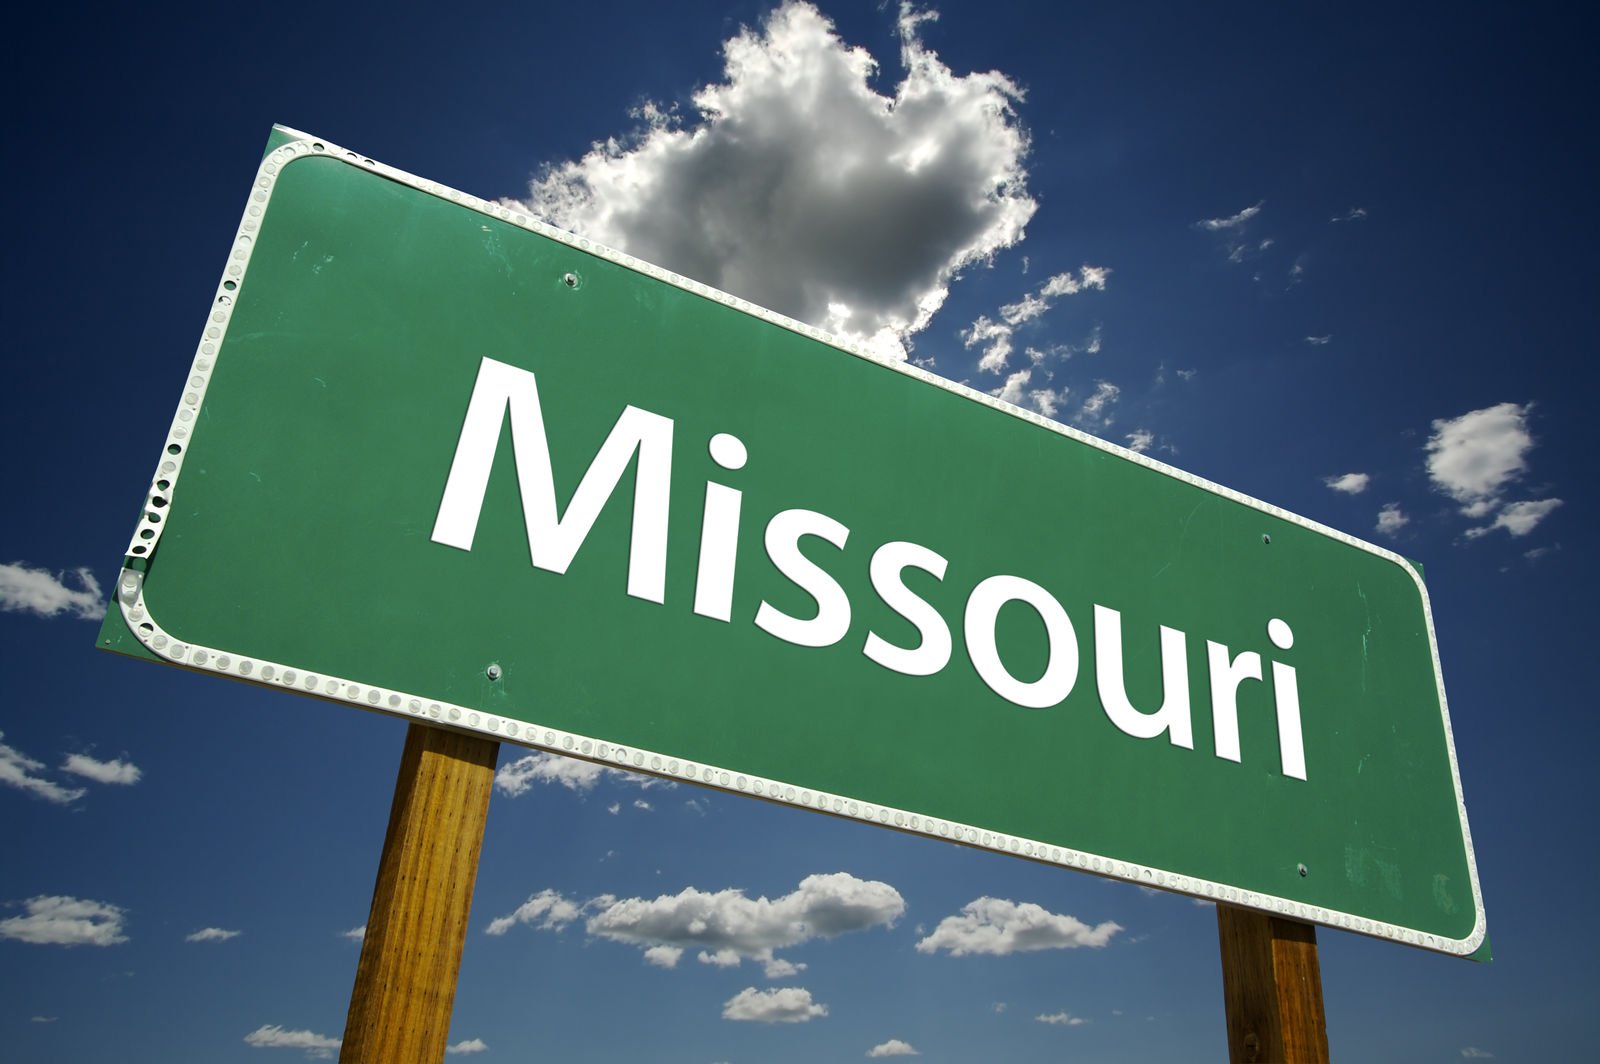 What are state minimums for car insurance in Missouri?